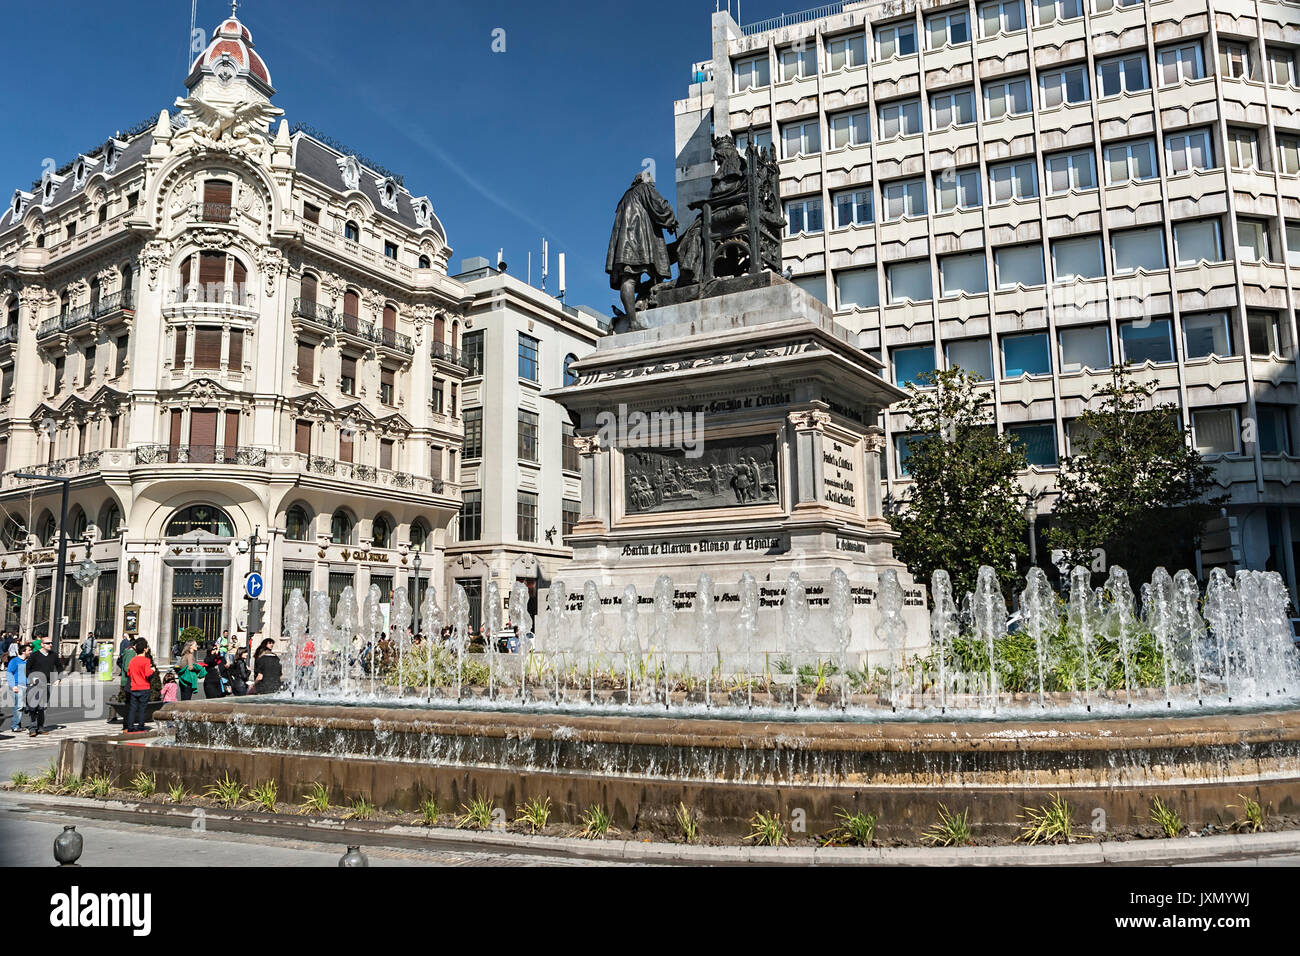 Monument to Isabel La Católica and Cristobal Colon against bank building, Monument is work of Mariano Benlliure, Granada, Andalusia, Spain Stock Photo